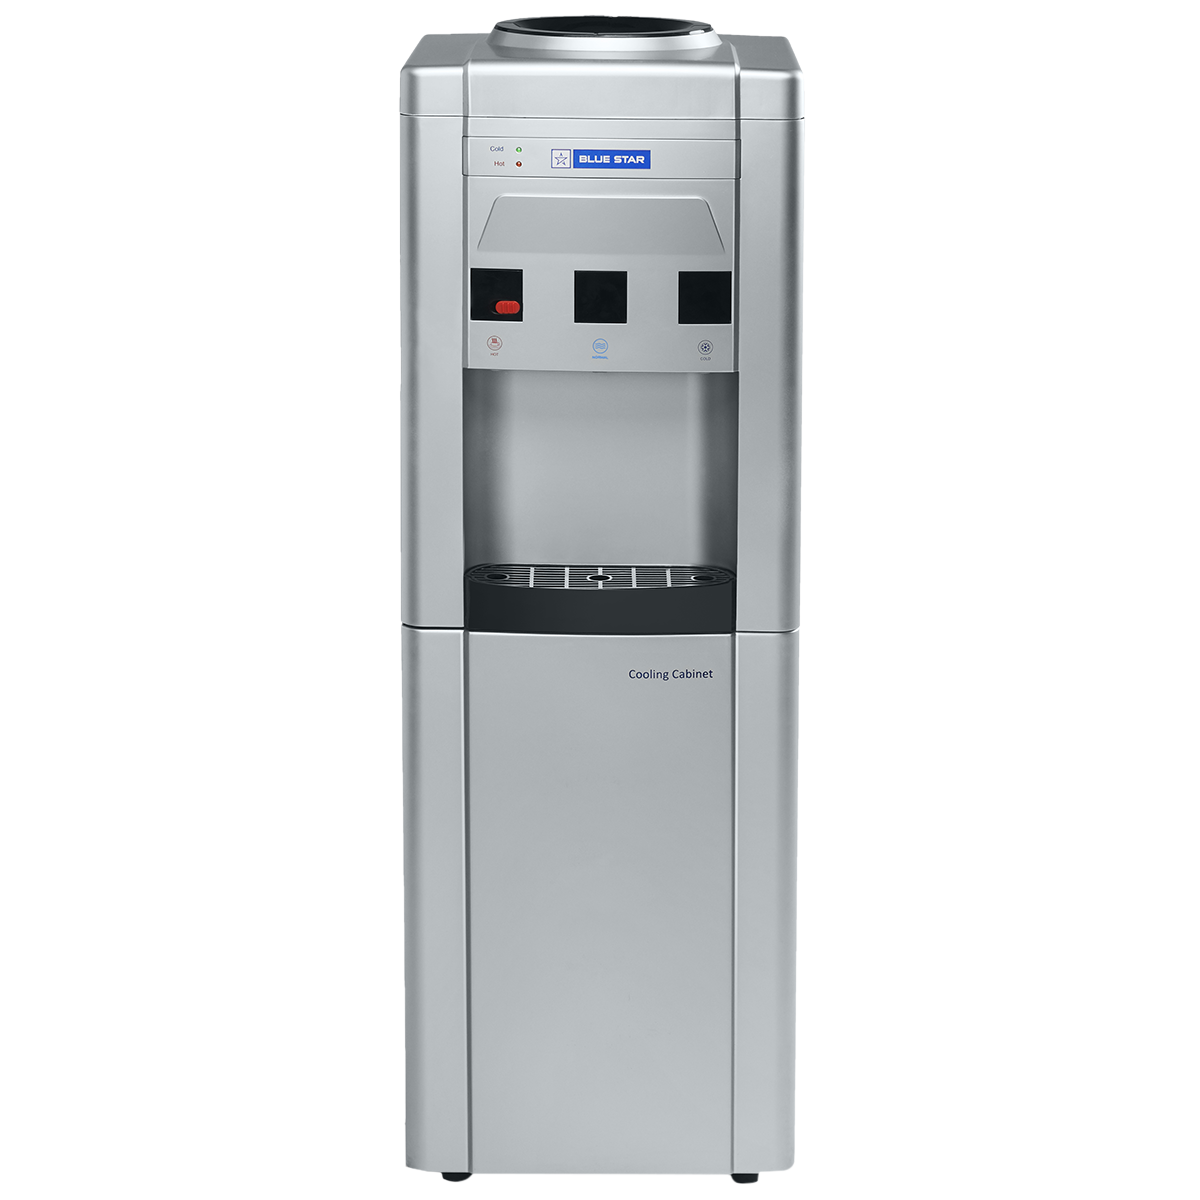 Blue Star GA Series Hot, Cold & Normal Top Load Water Dispenser with Cooling Cabinet (Grey)